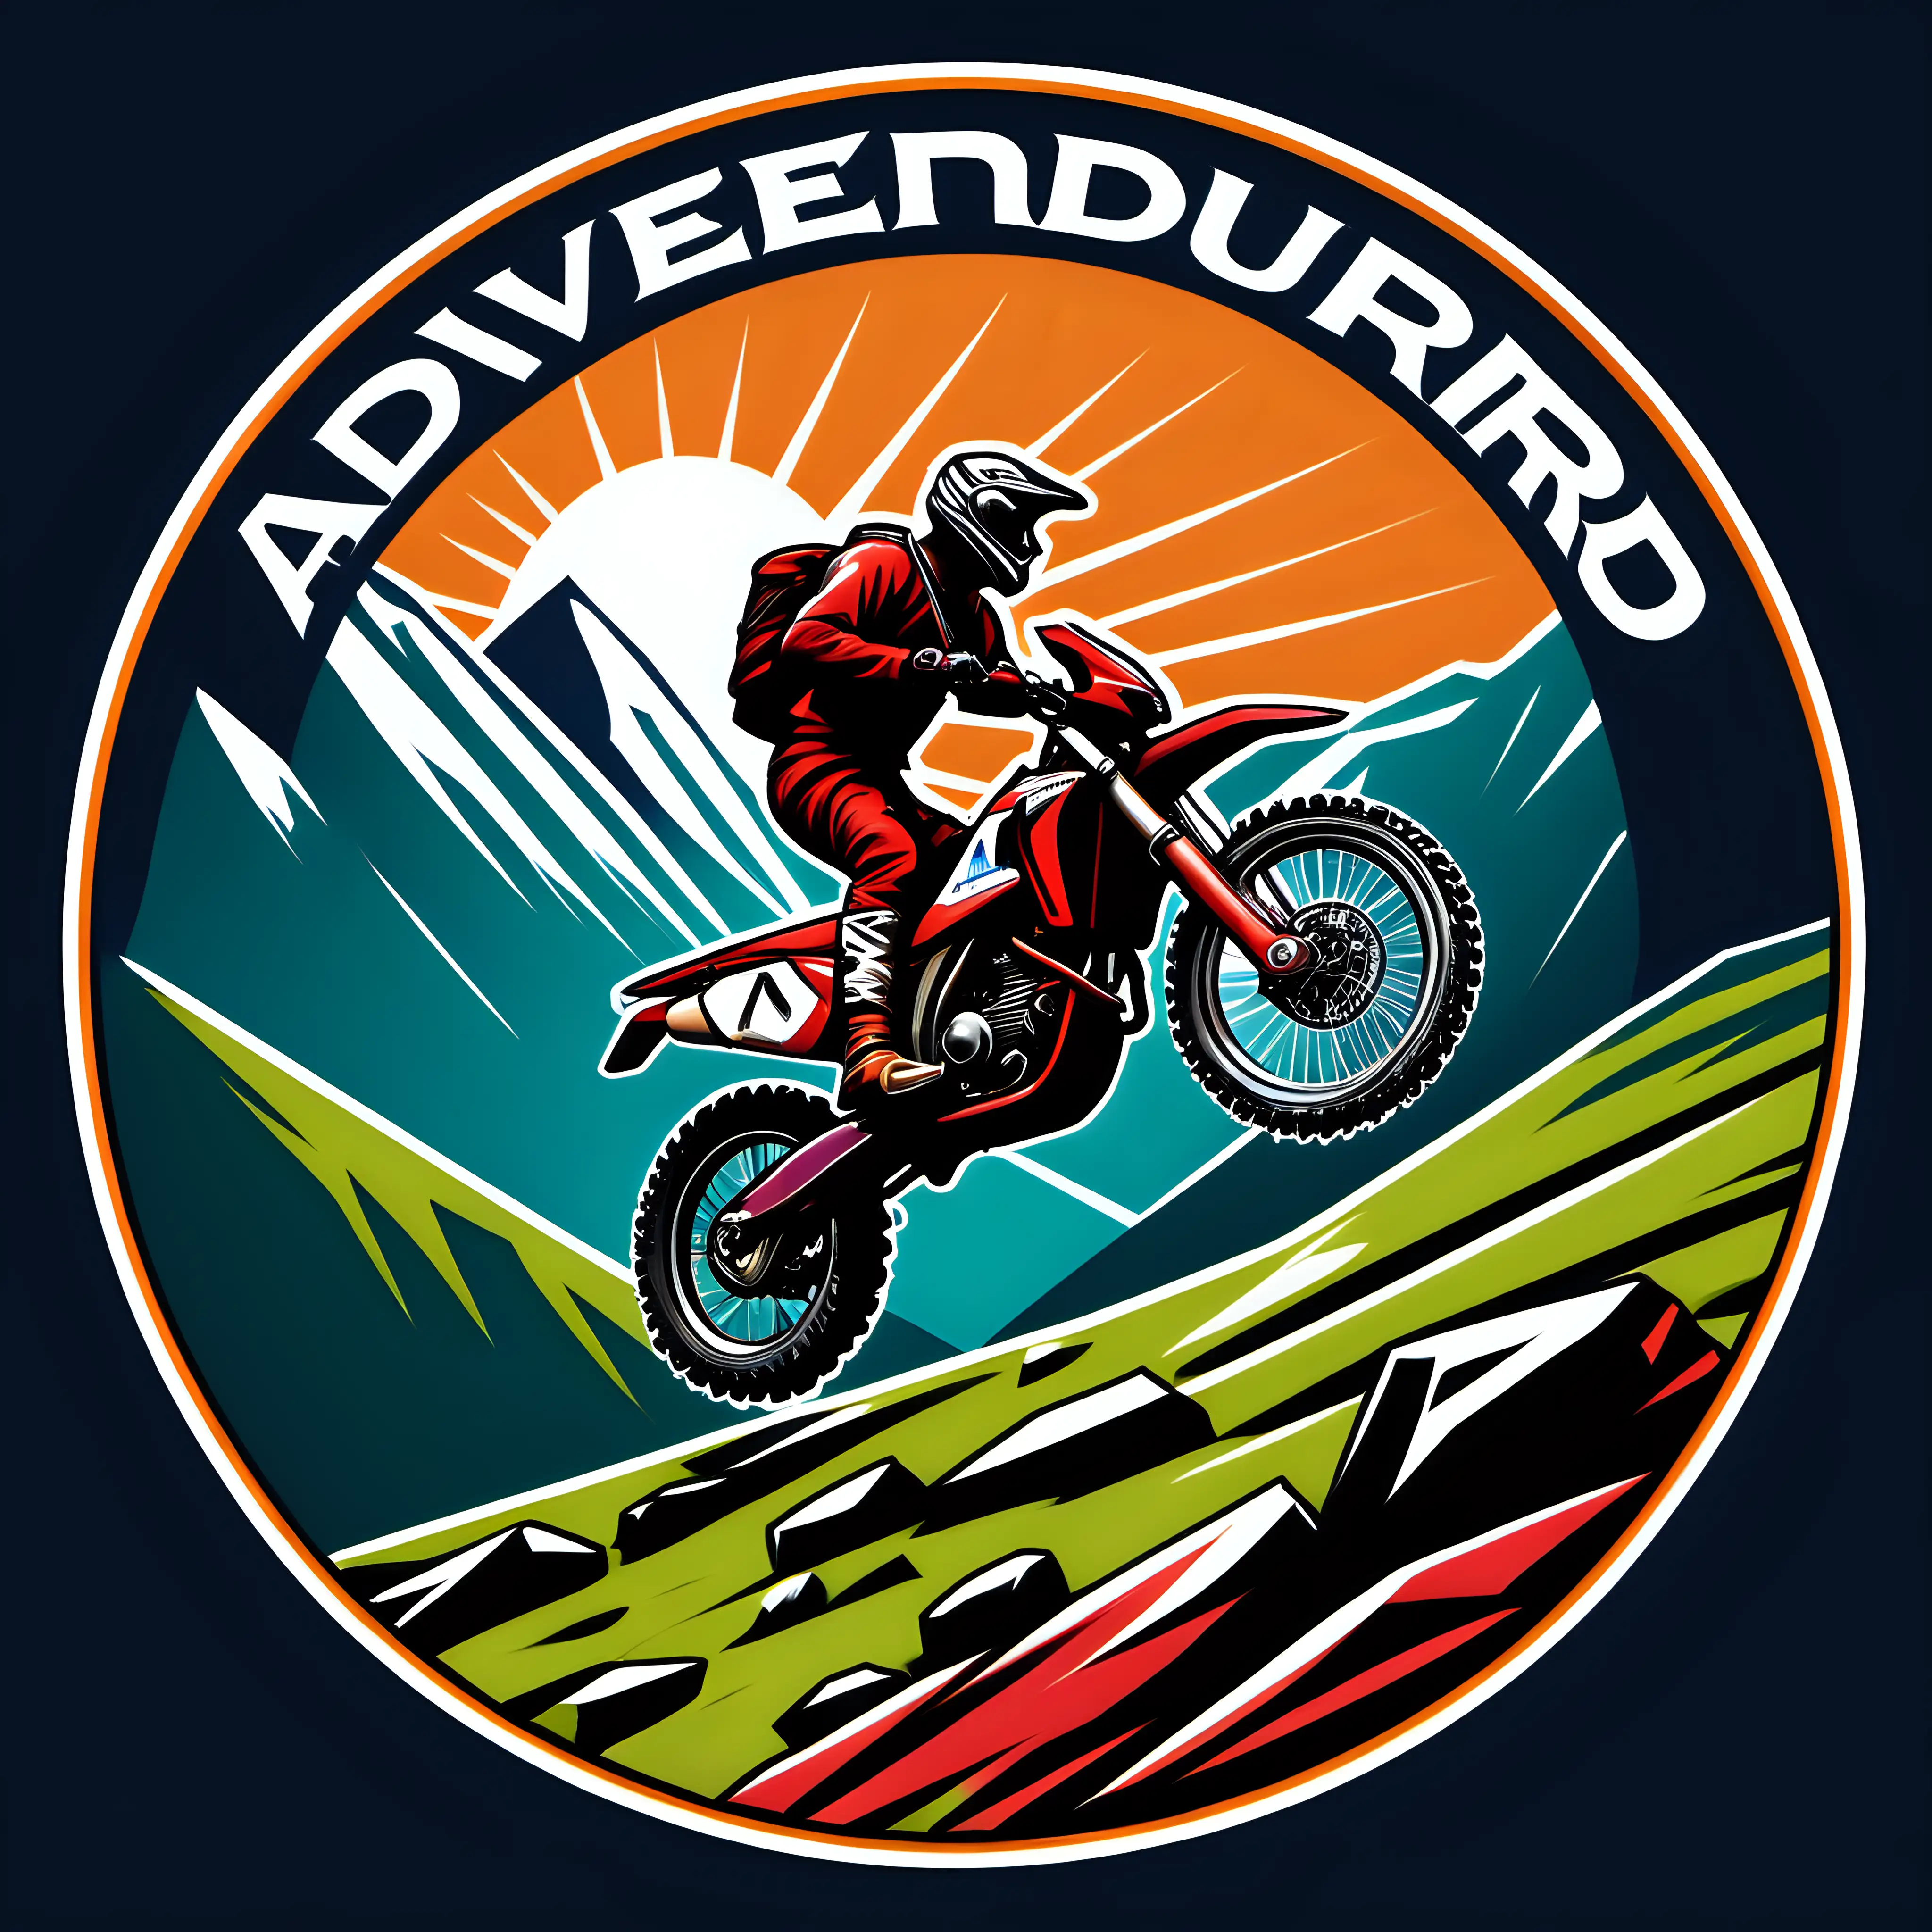 Adventure Motorcycle Rally Logo Conquering Mountains with ADVENDURO